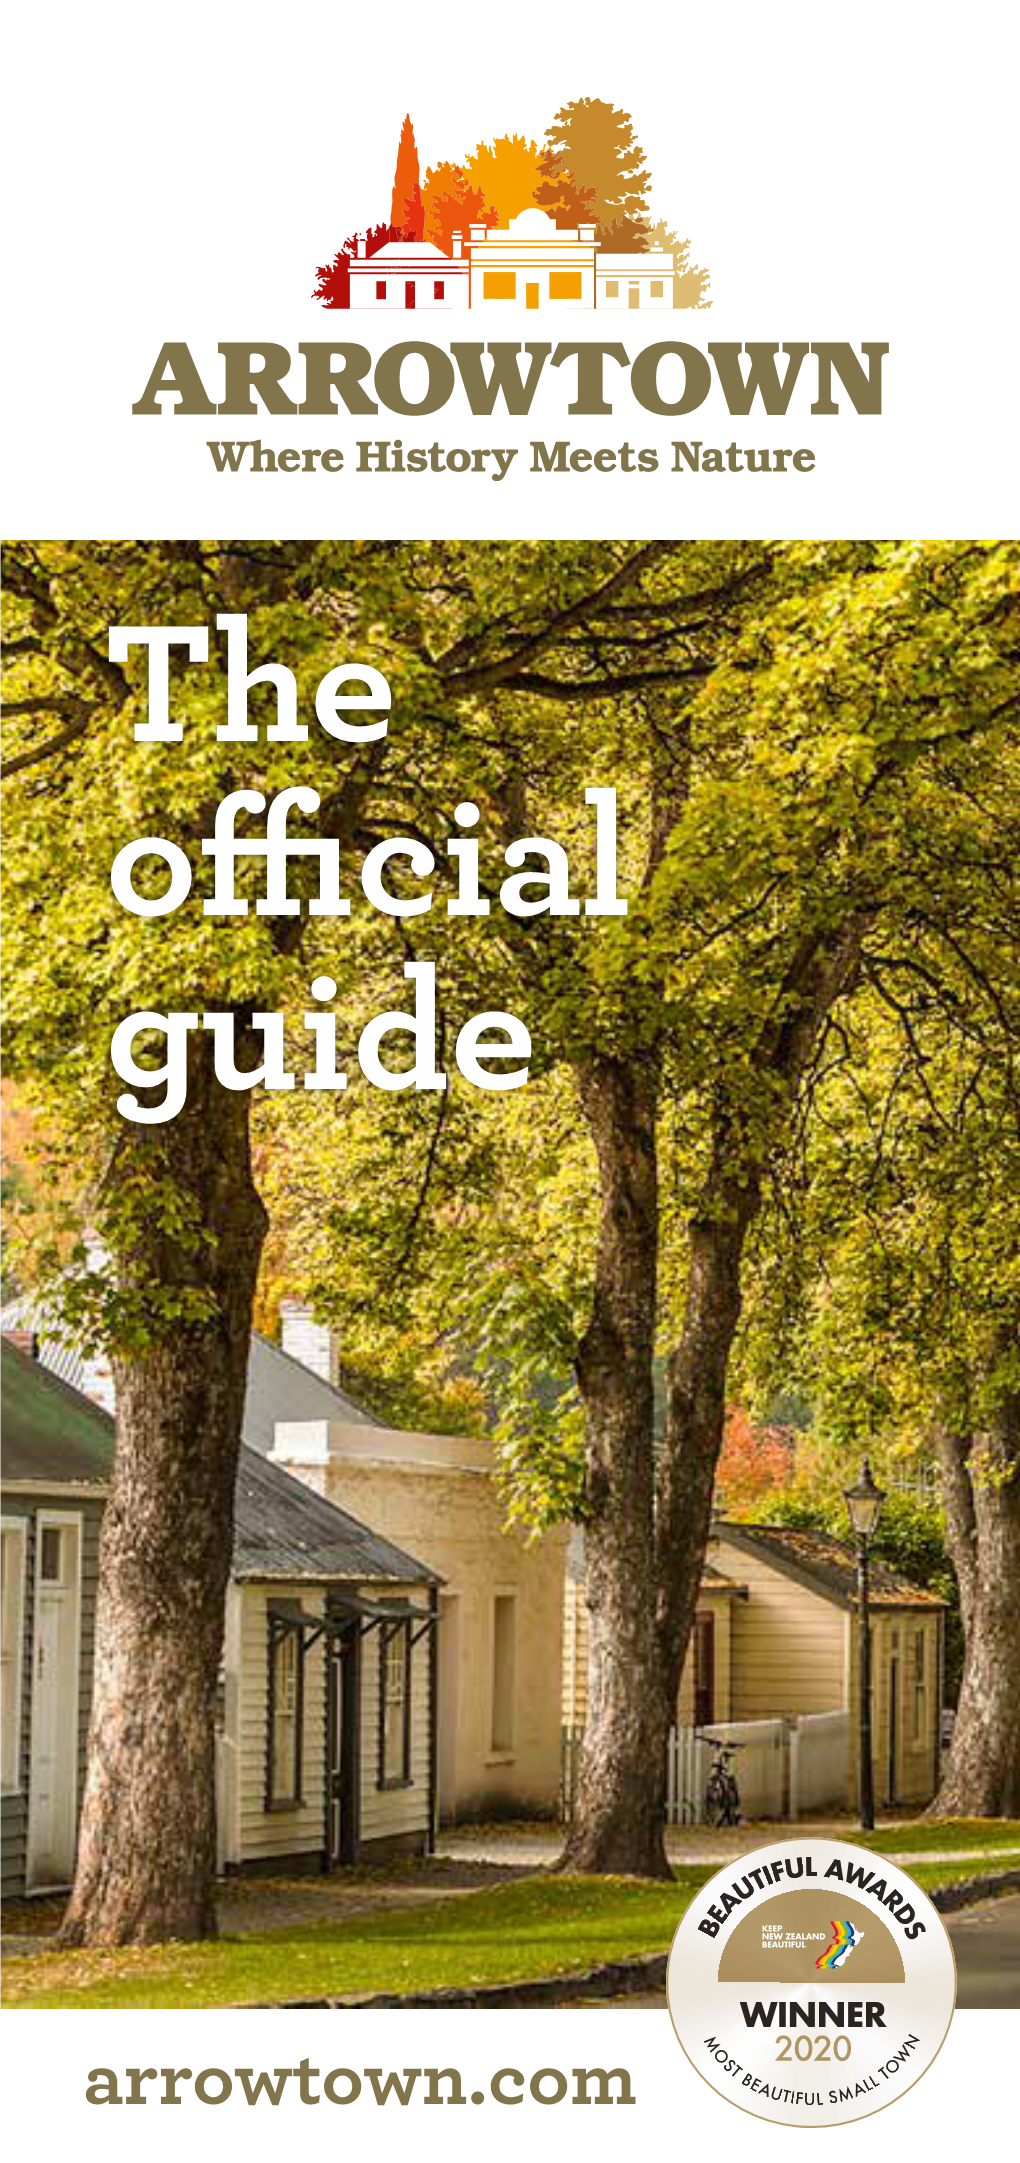 Arrowtown Promotion Official Guide